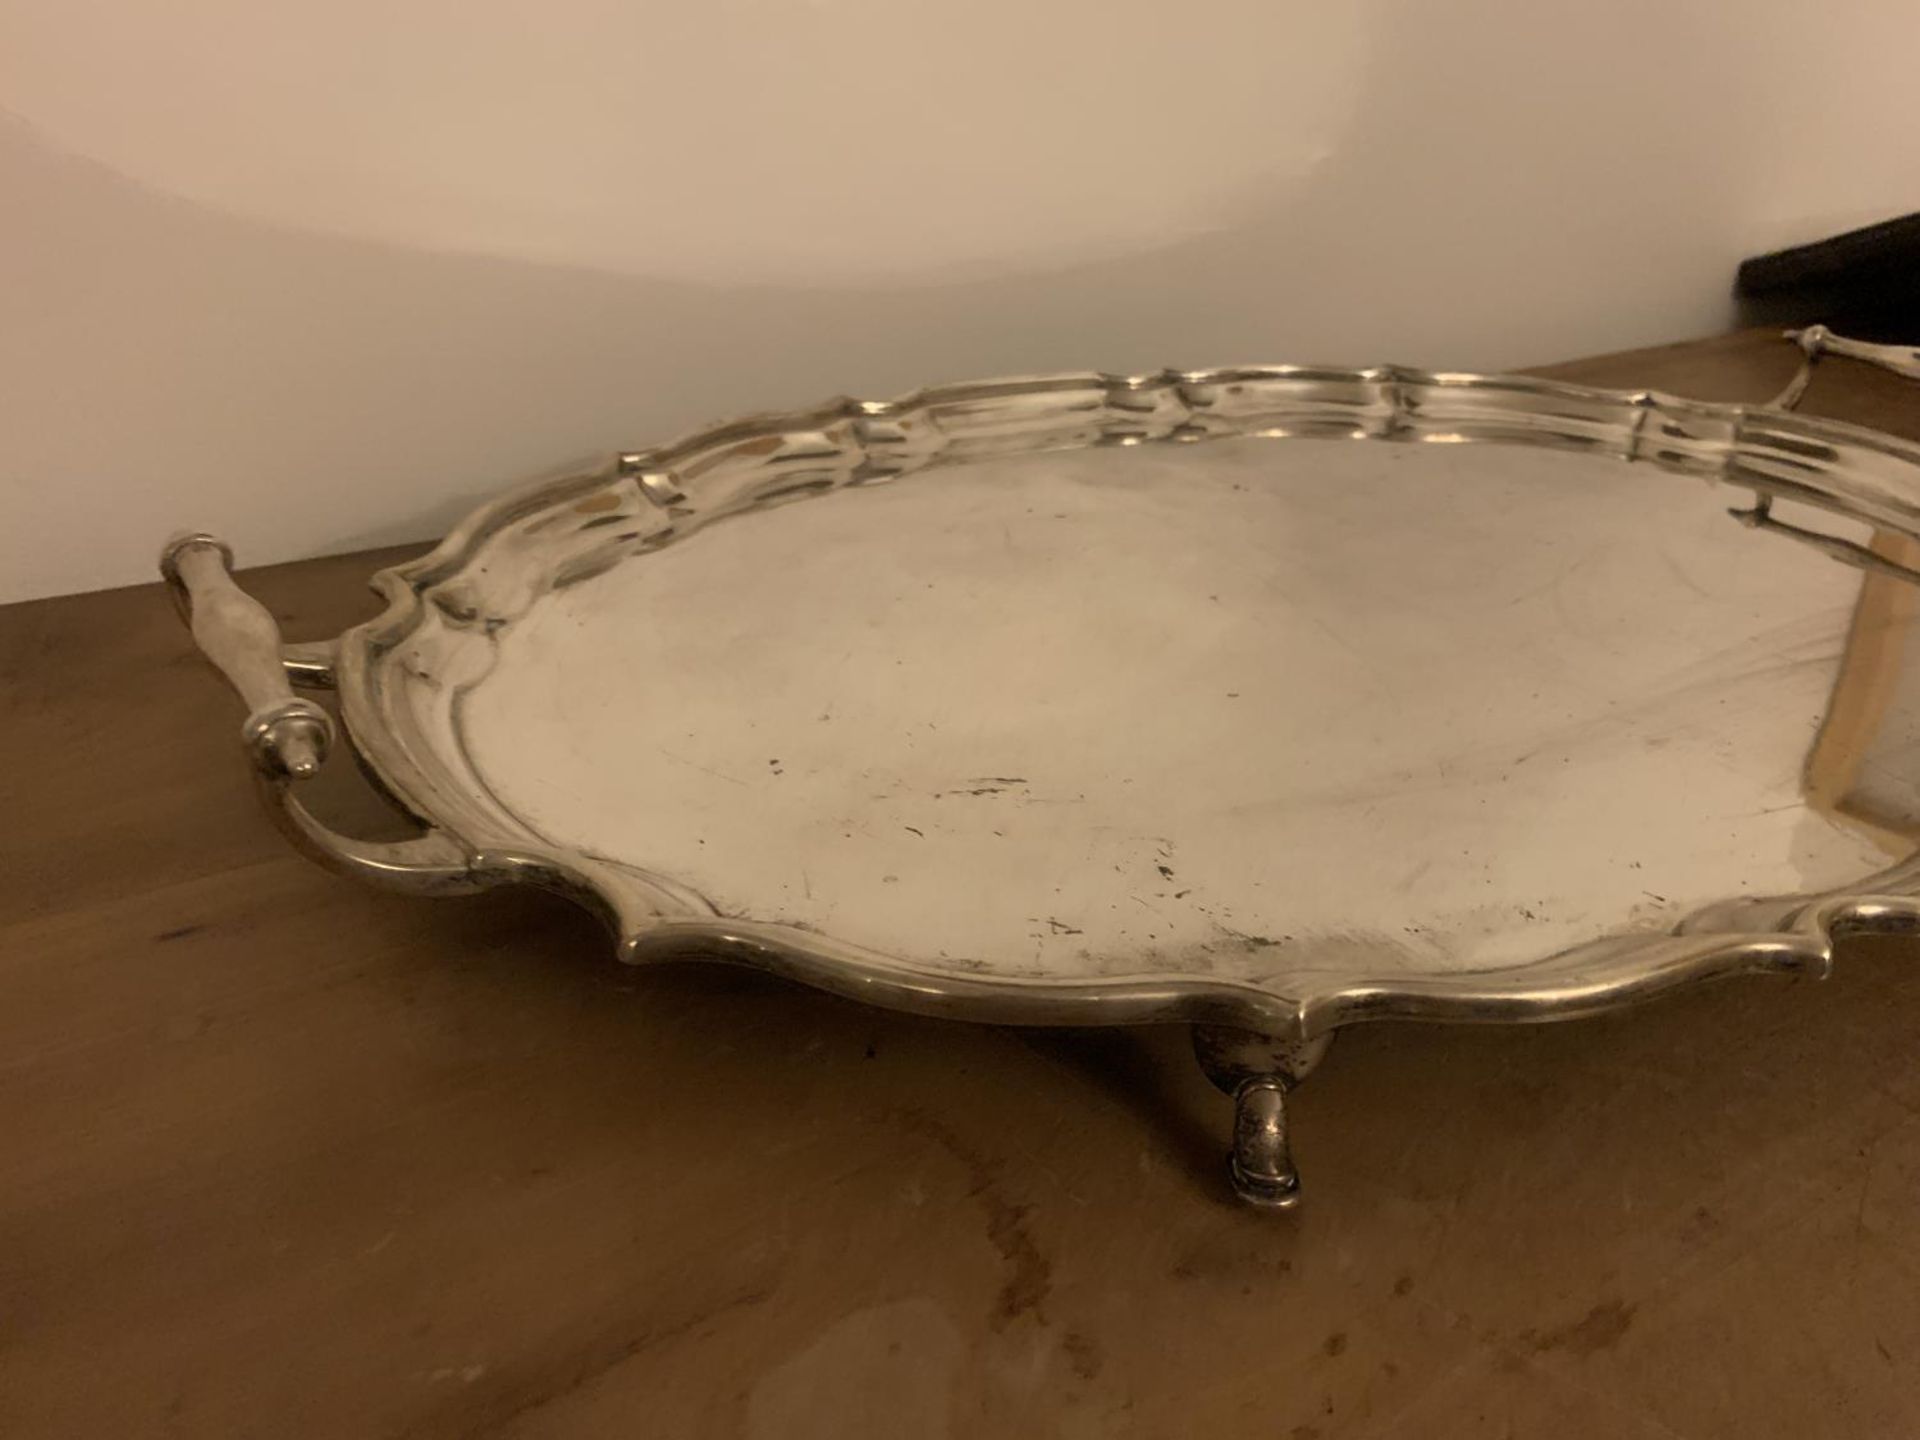 A LARGE TWIN HANDLED HALLMARKED CHESTER SILVER TRAY WITH FOUR FEET GROSS WEIGHT 2923 GRAMS - Image 2 of 6